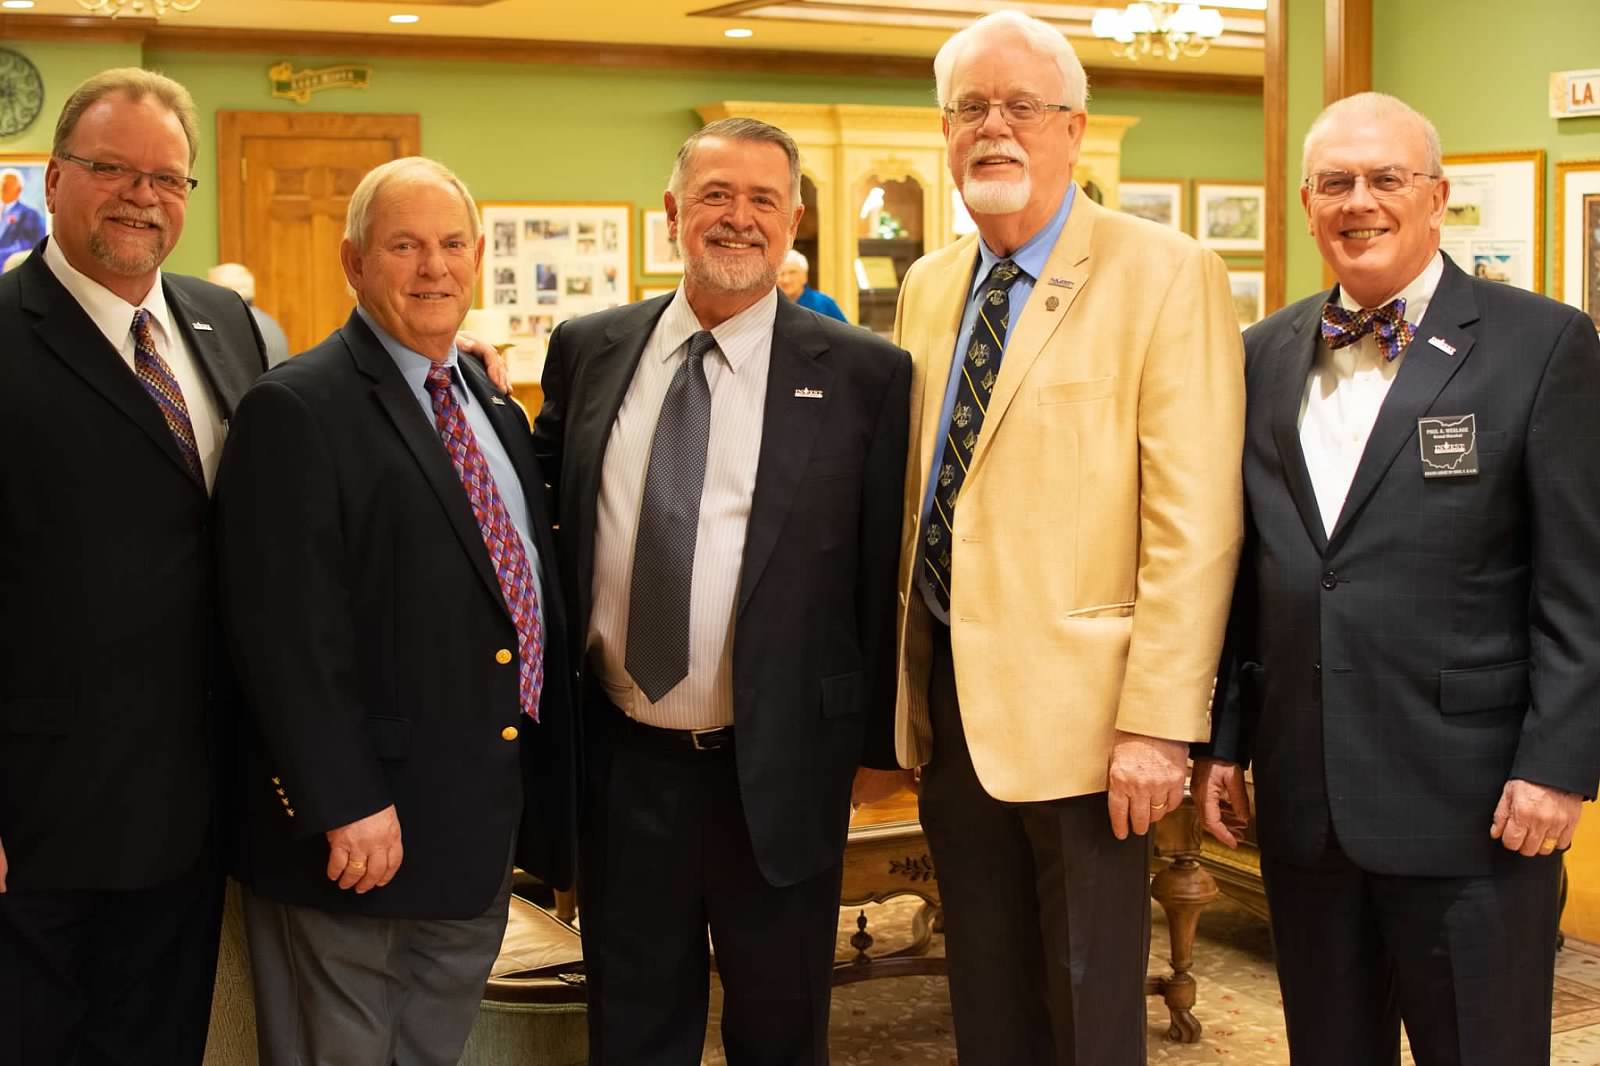 Group of men gather and smile at the Grand Lodge of Ohio Florida Reception